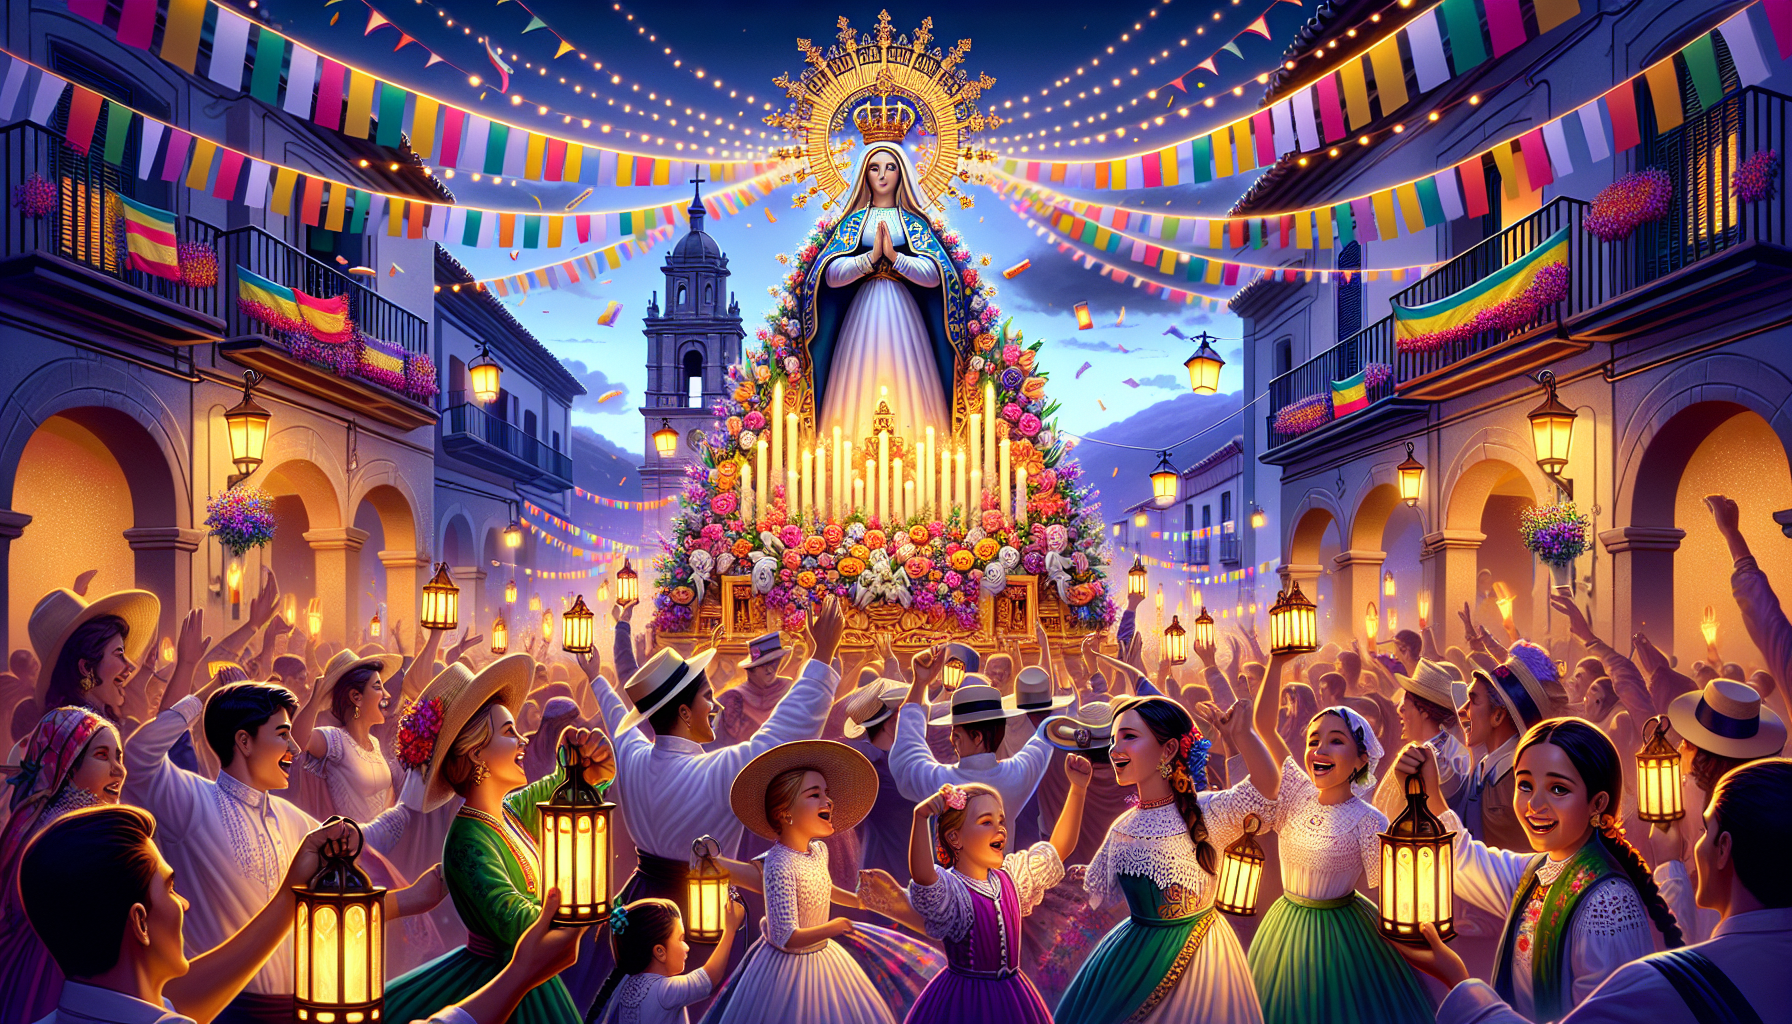 A vibrant yet serene depiction of a traditional Spanish celebration for the Feast of the Immaculate Conception. Picture a picturesque town square adorned with festive lights and colorful banners. In t